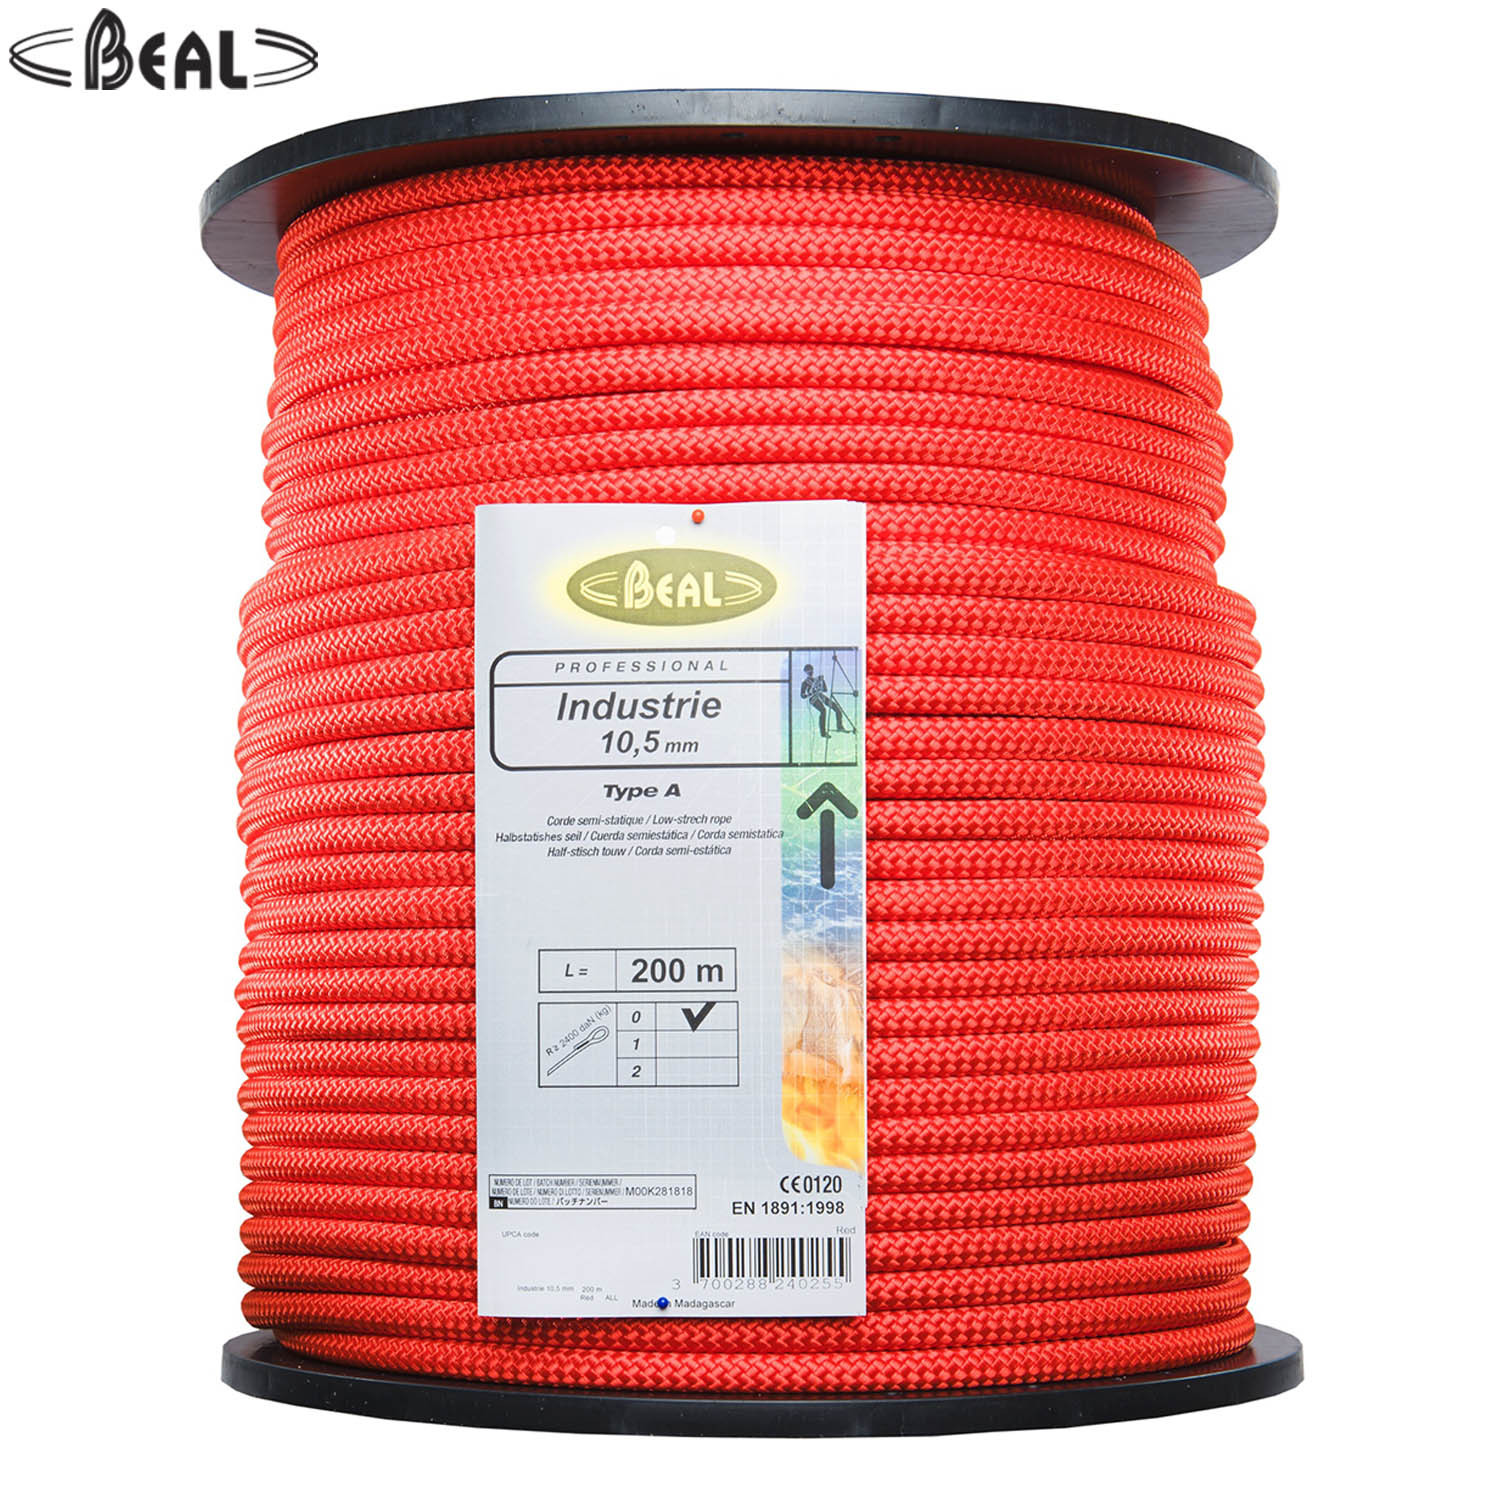 Beal Industrie Rope 10.5 mm (200 mtr. Roll)